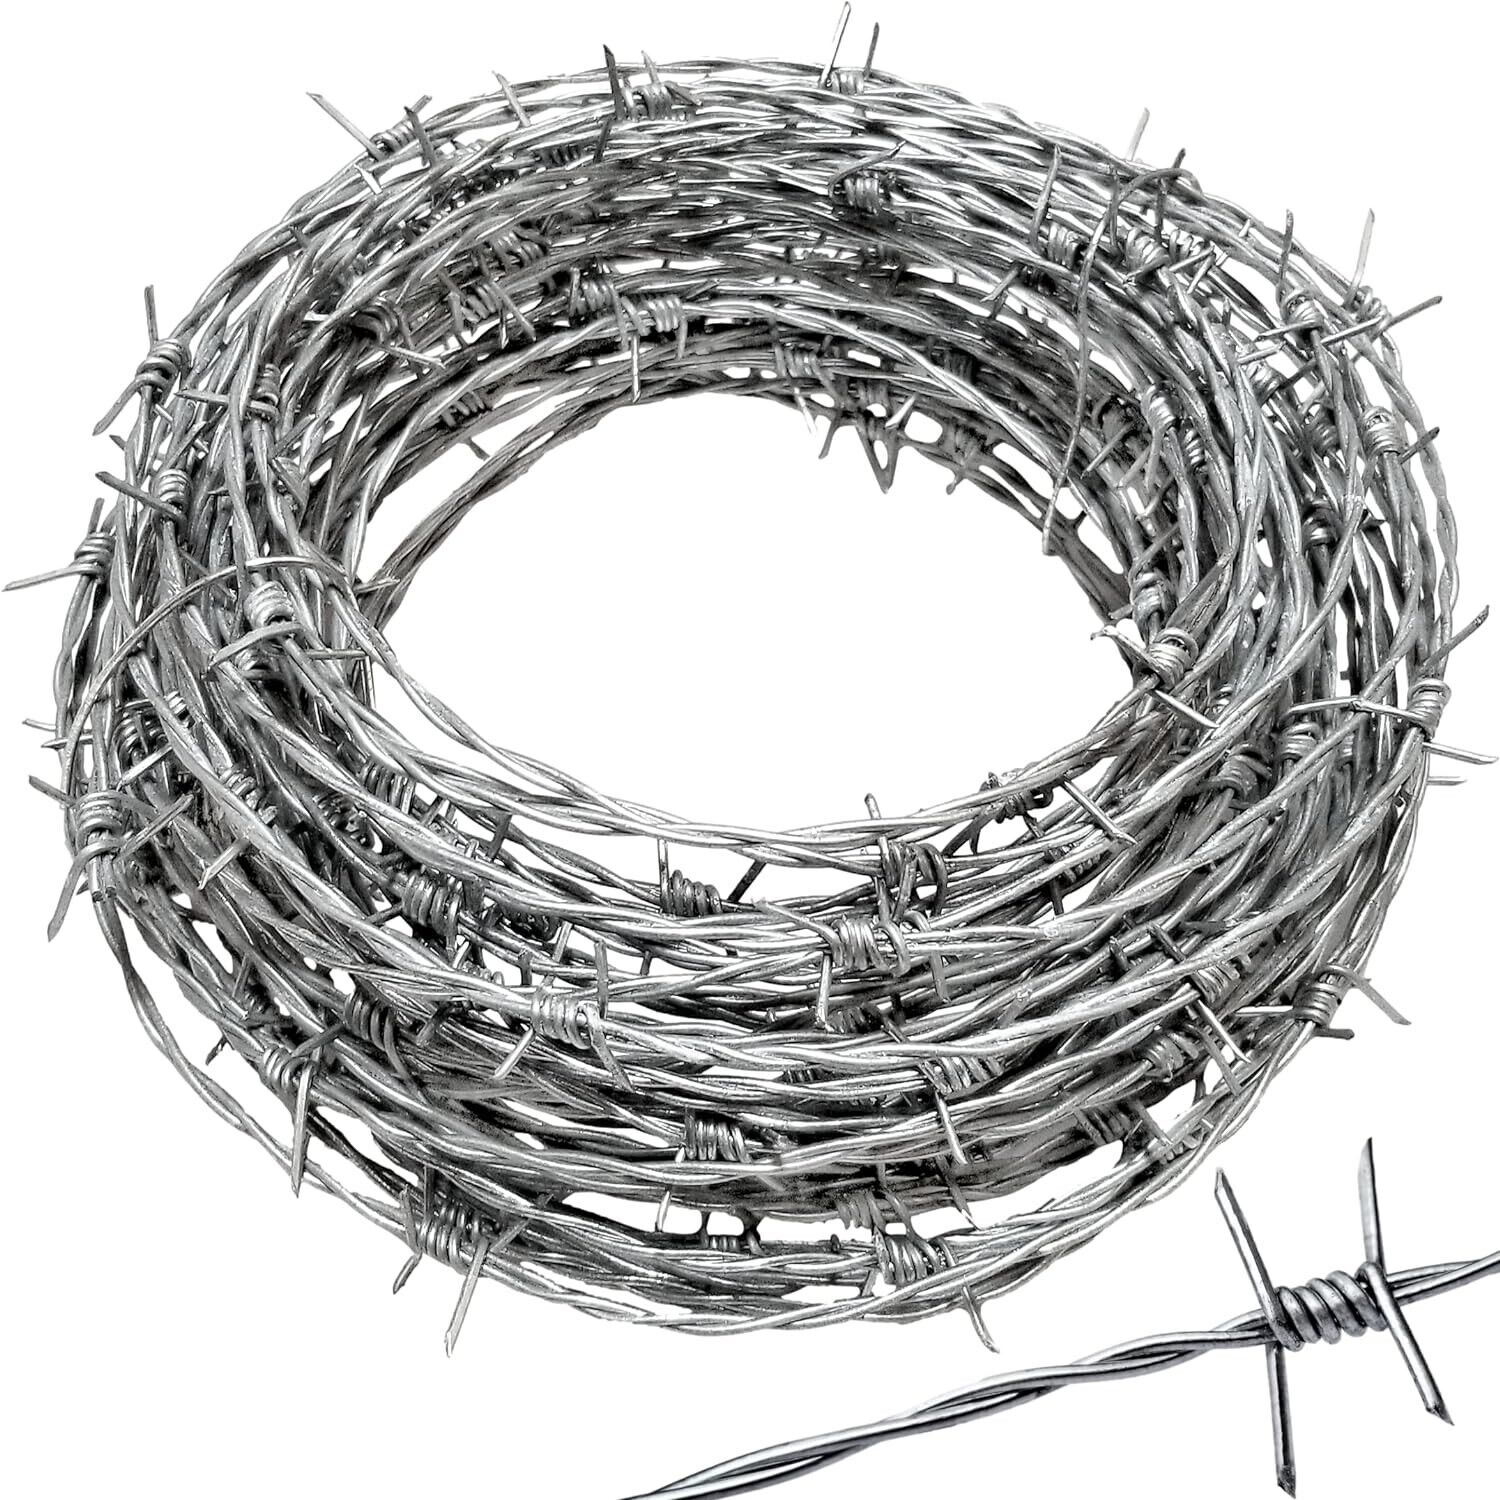 Real Barbed Wire 50ft 18 Gauge - Great for Crafts Fences and Critter Deterr